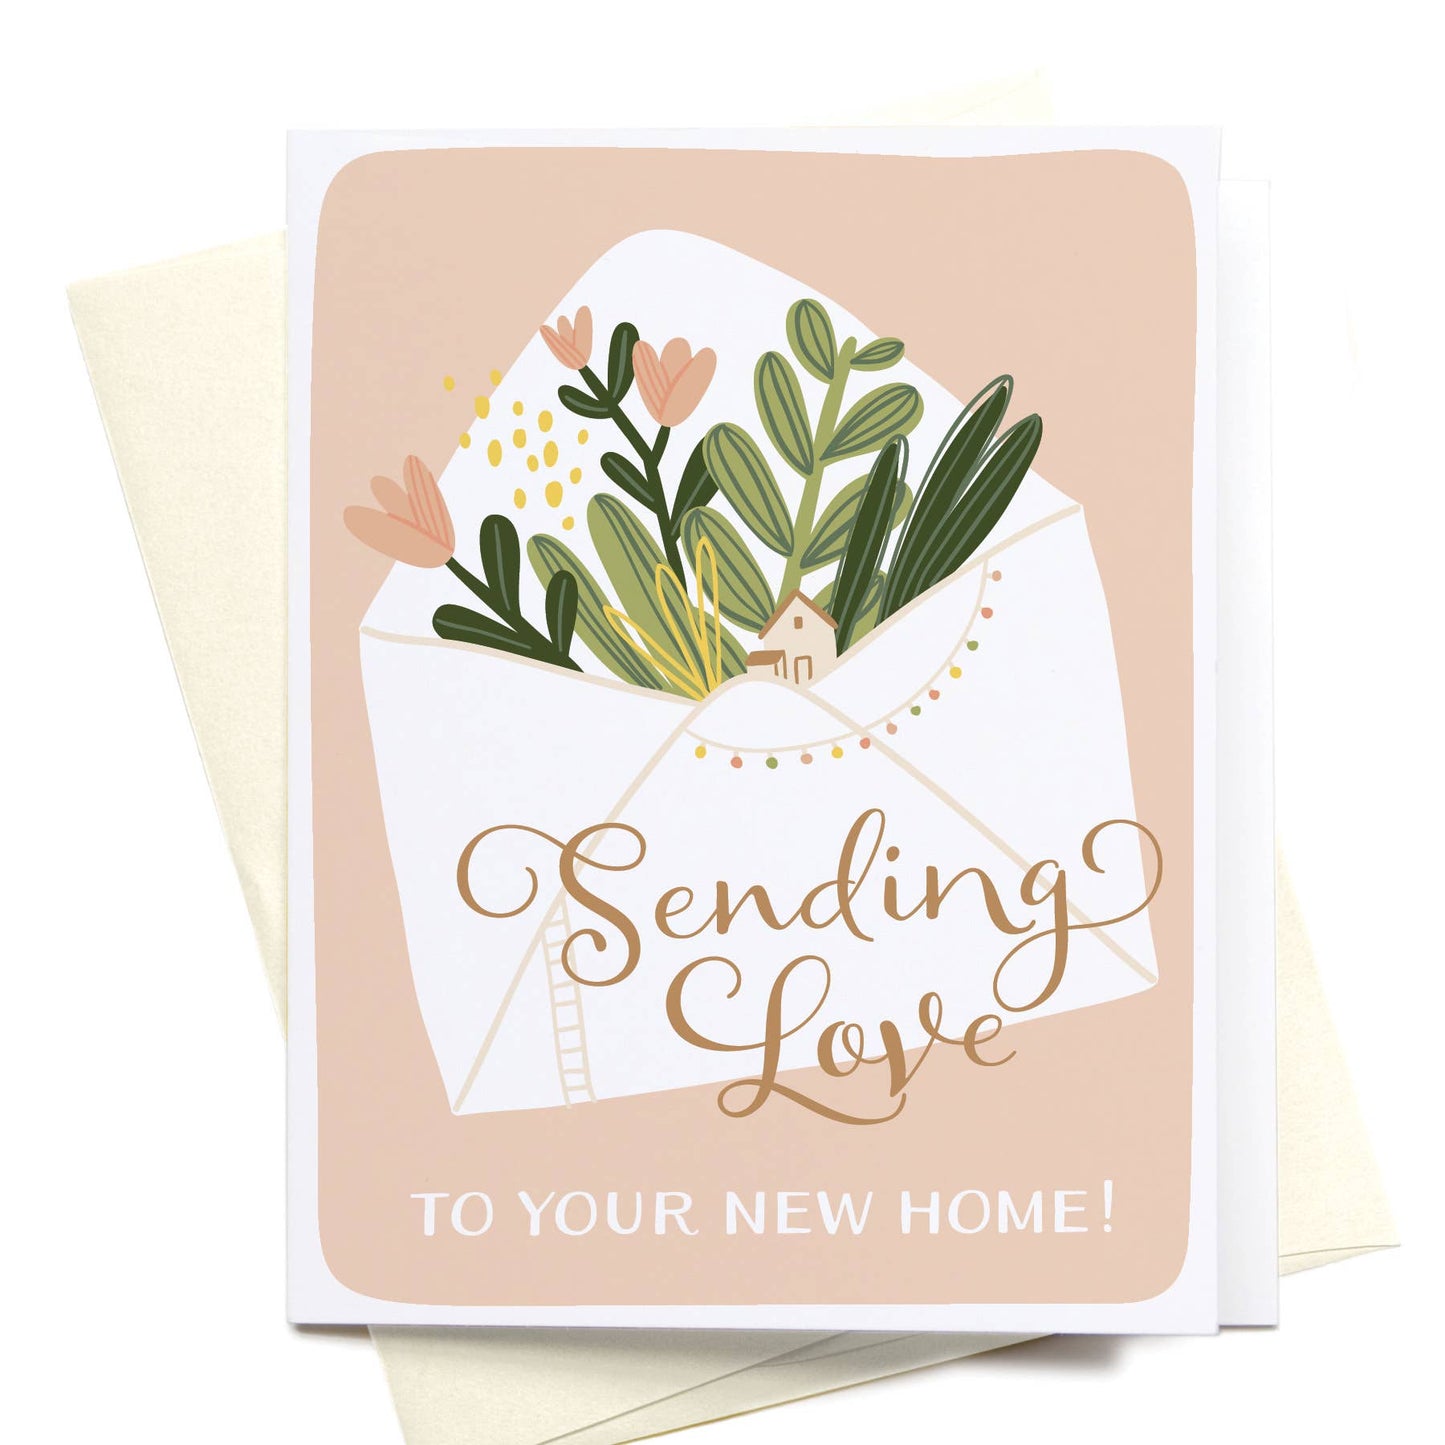 "Sending Love to Your New Home!" Greeting Card